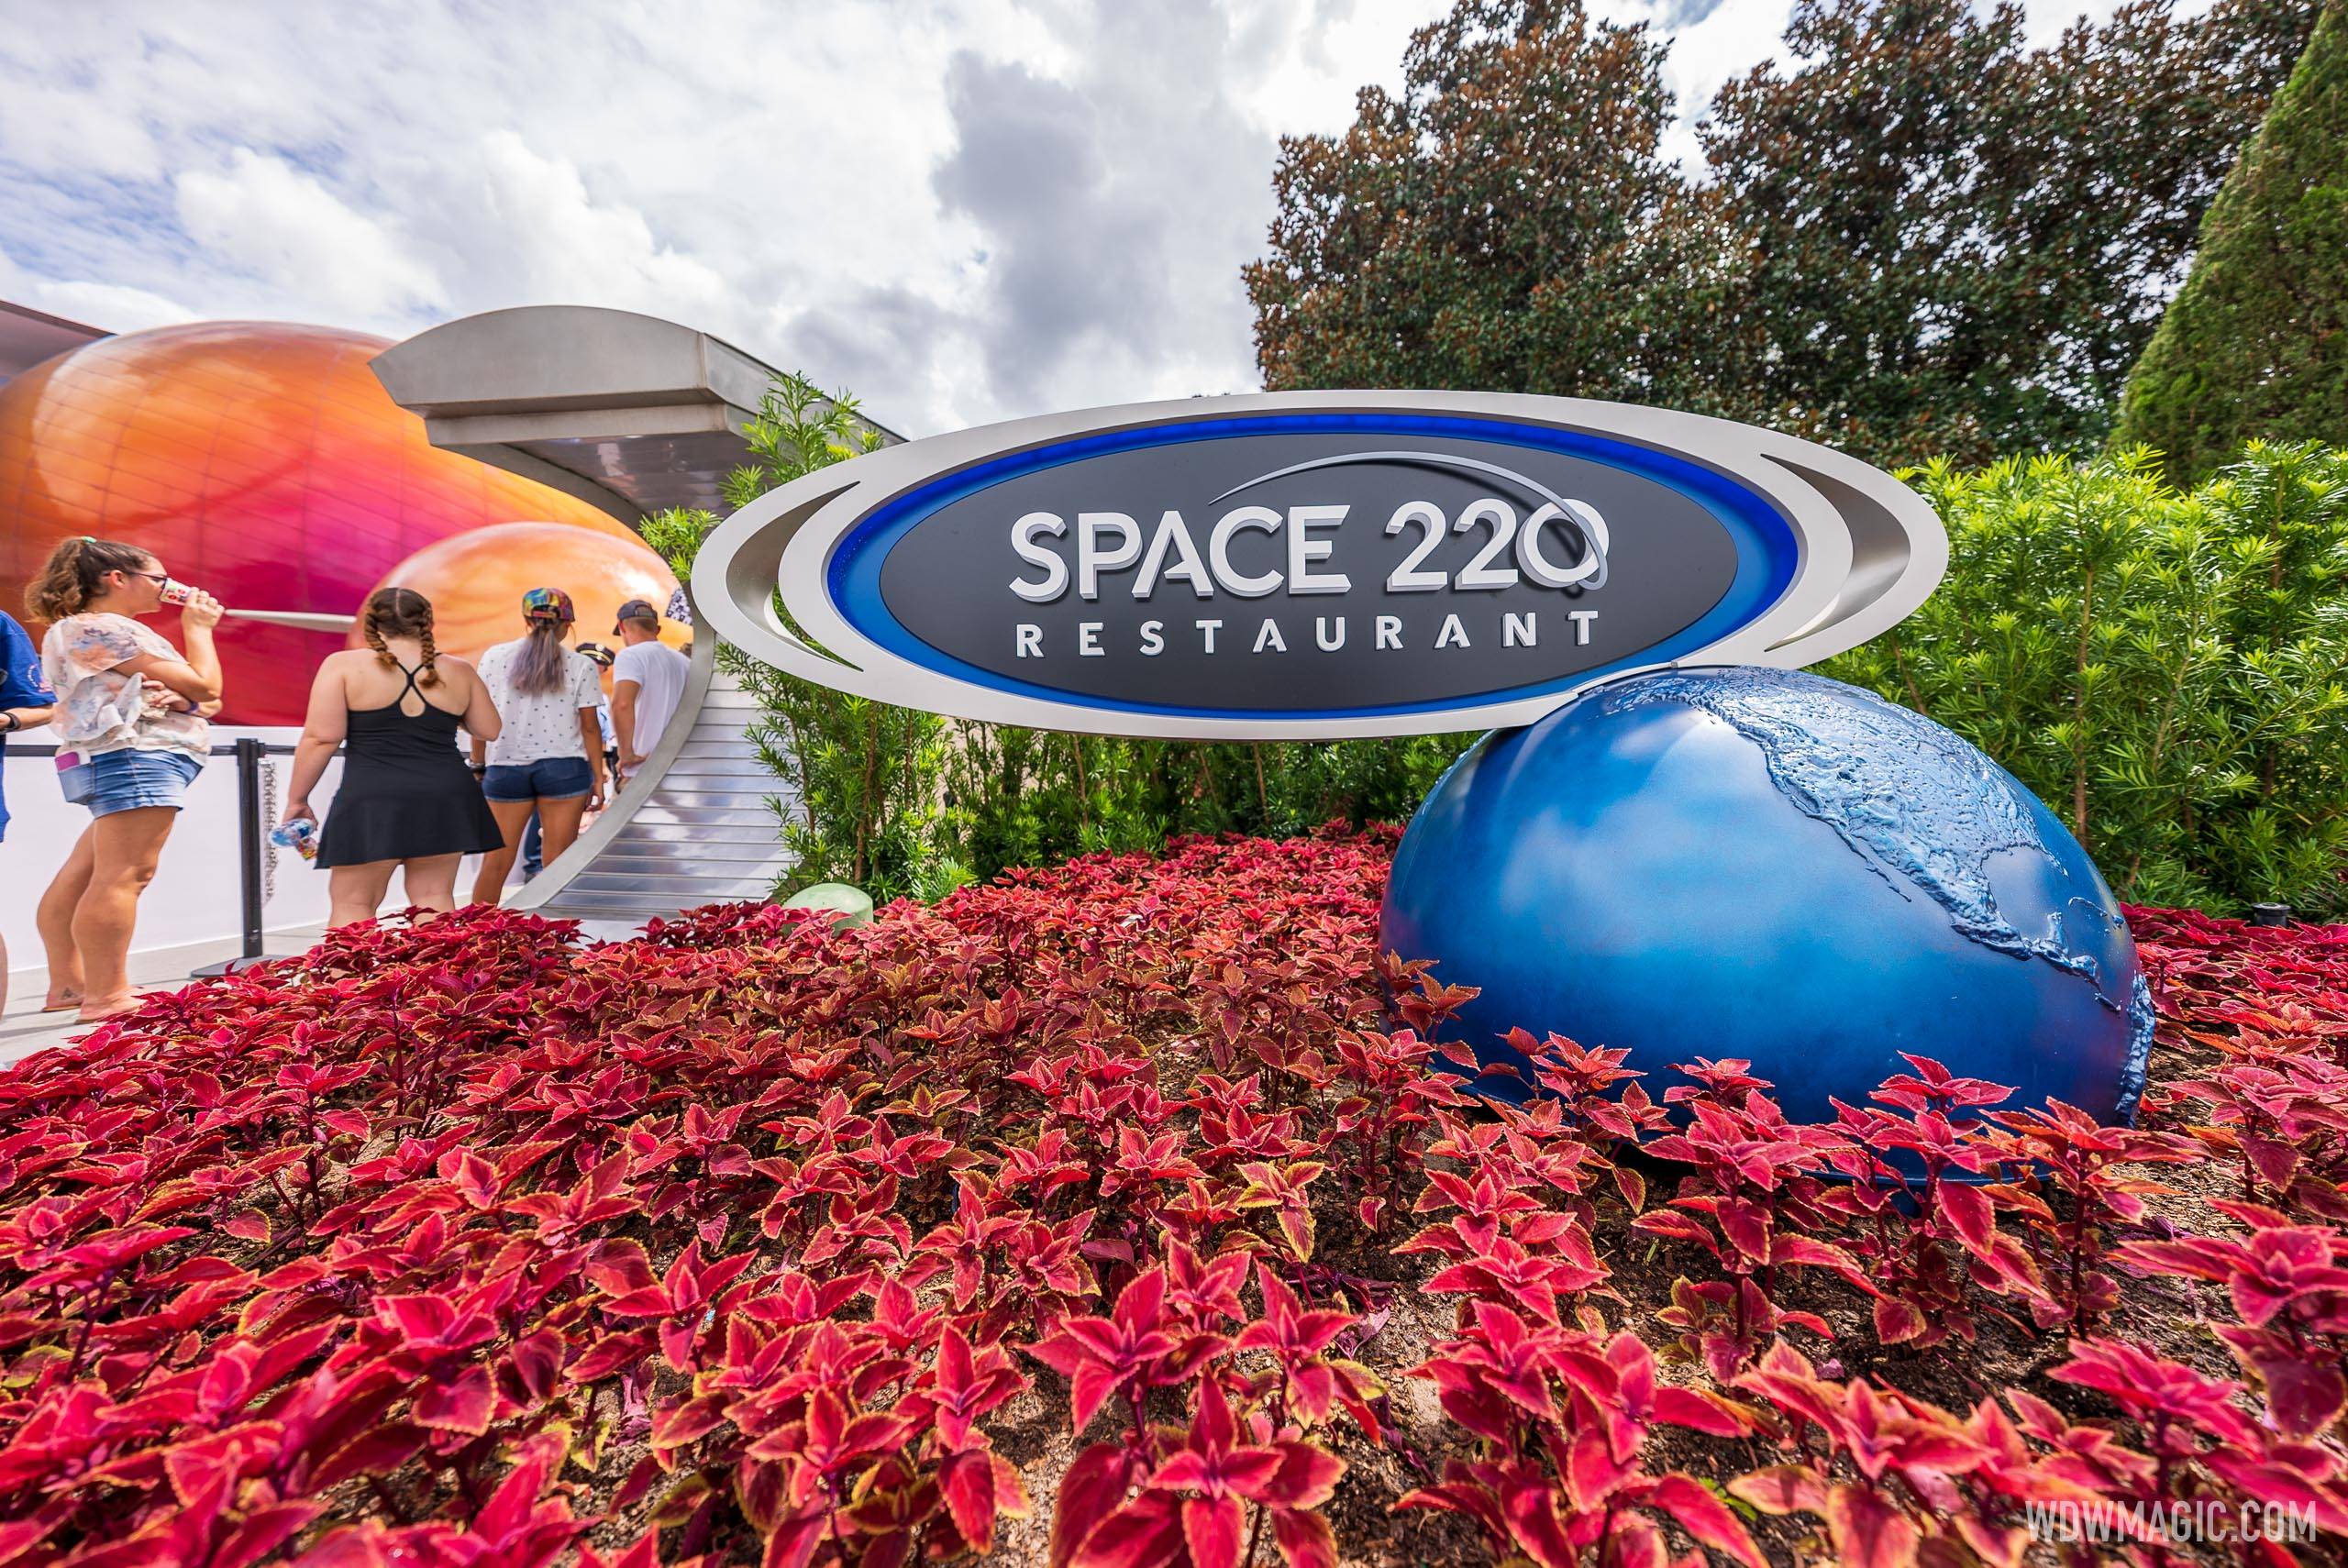 Space 220 opened a year ago today